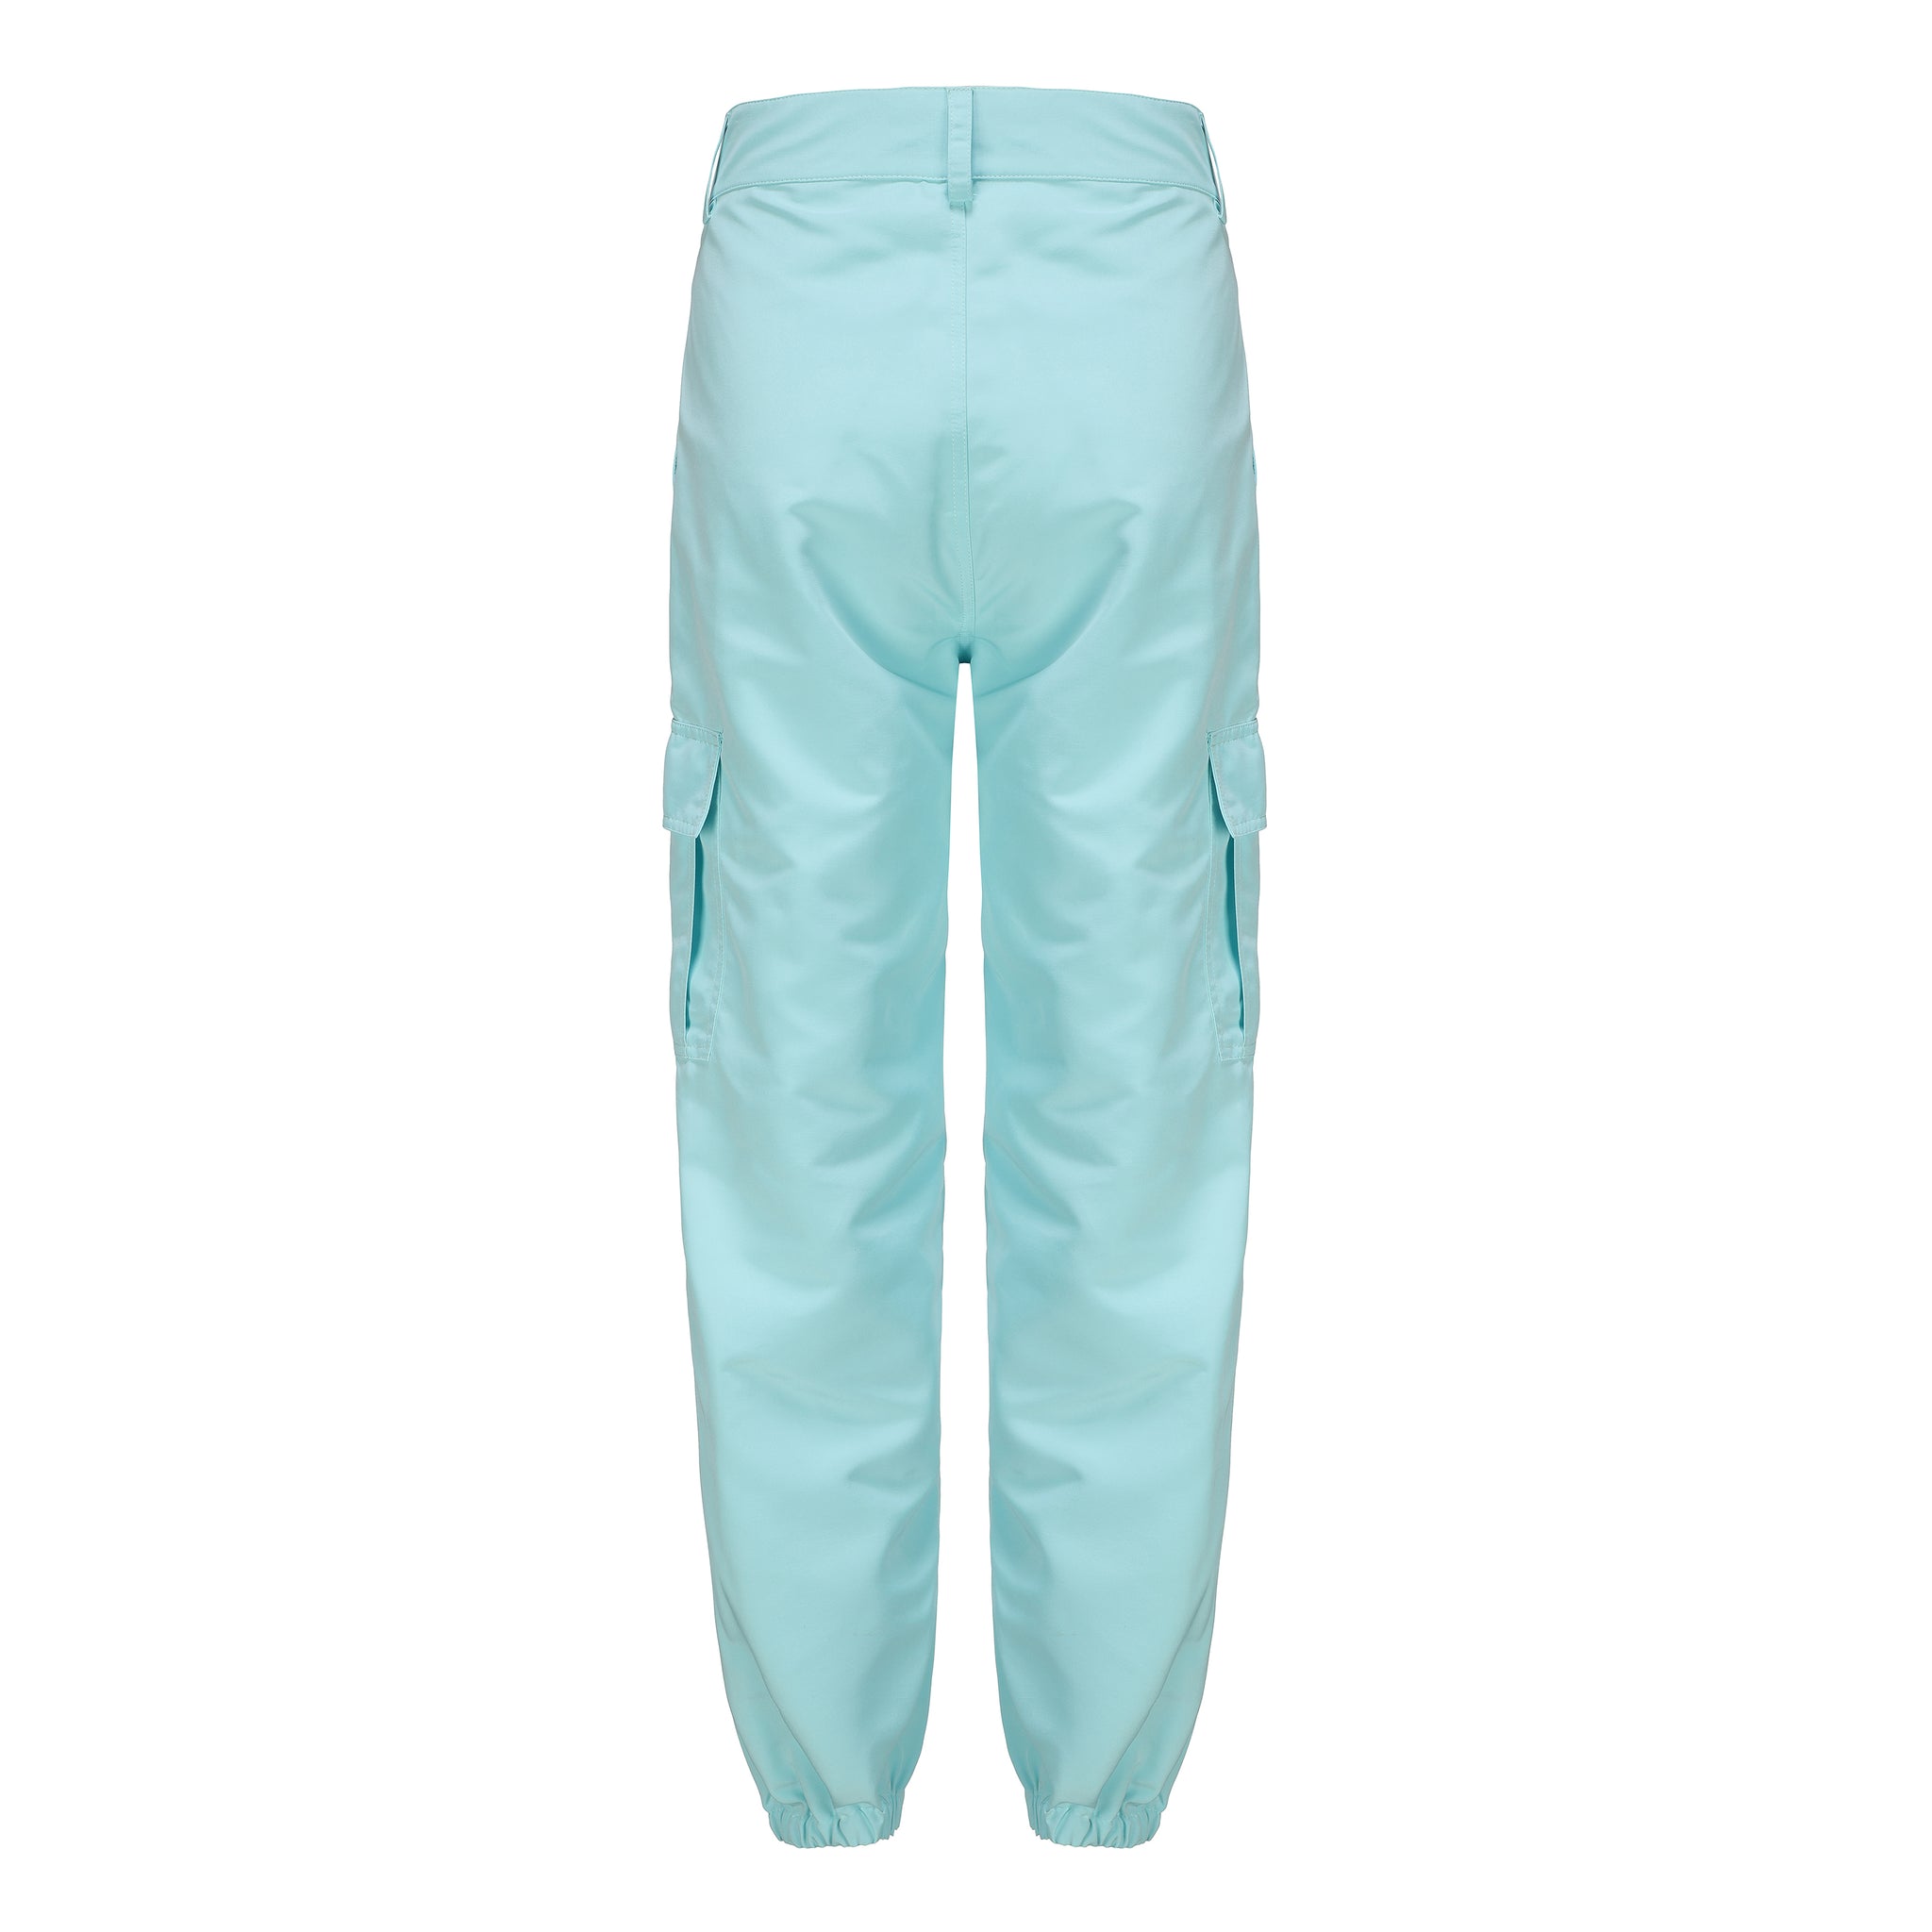 Mint Embroidery Joggers